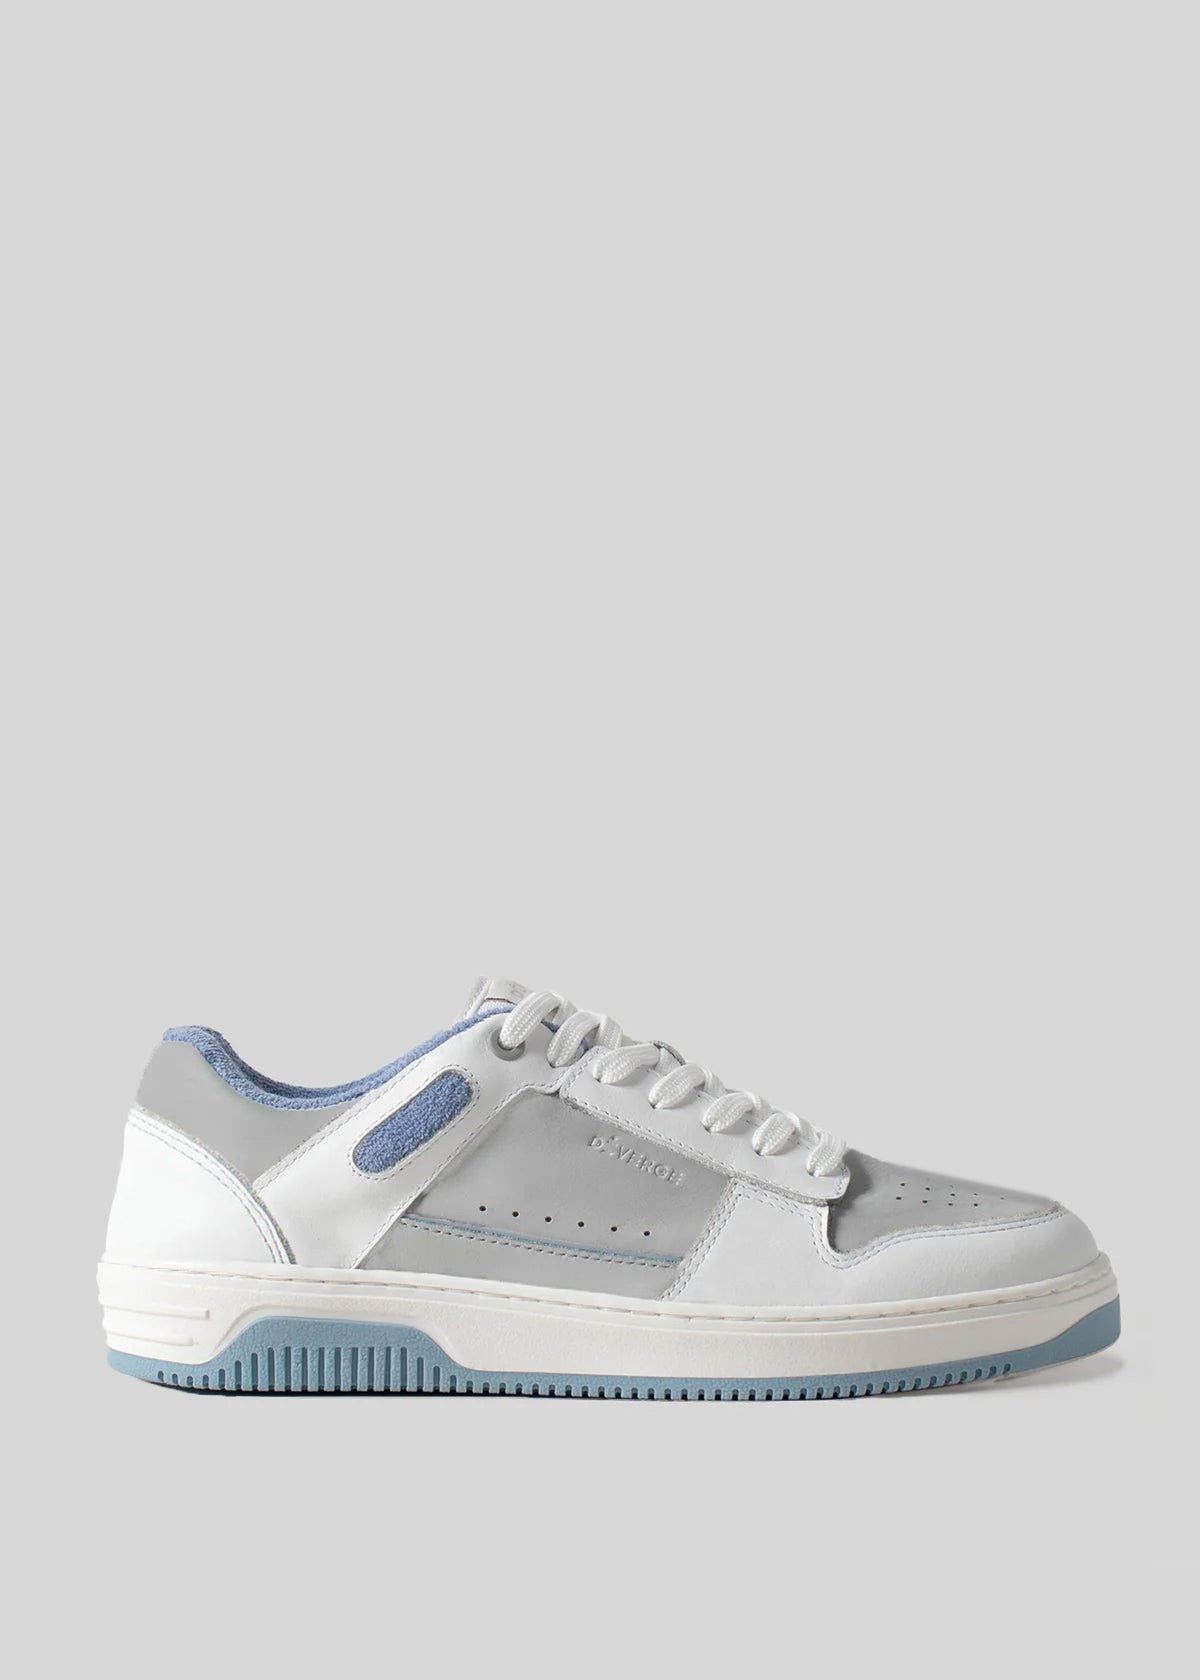 A white and light blue M0015 by Angelica sneaker, handcrafted in Portugal using premium Italian leathers, featuring perforations on the sides, a lace-up front, and a contrasting light blue sole. This retro-future sneaker is viewed from the side.